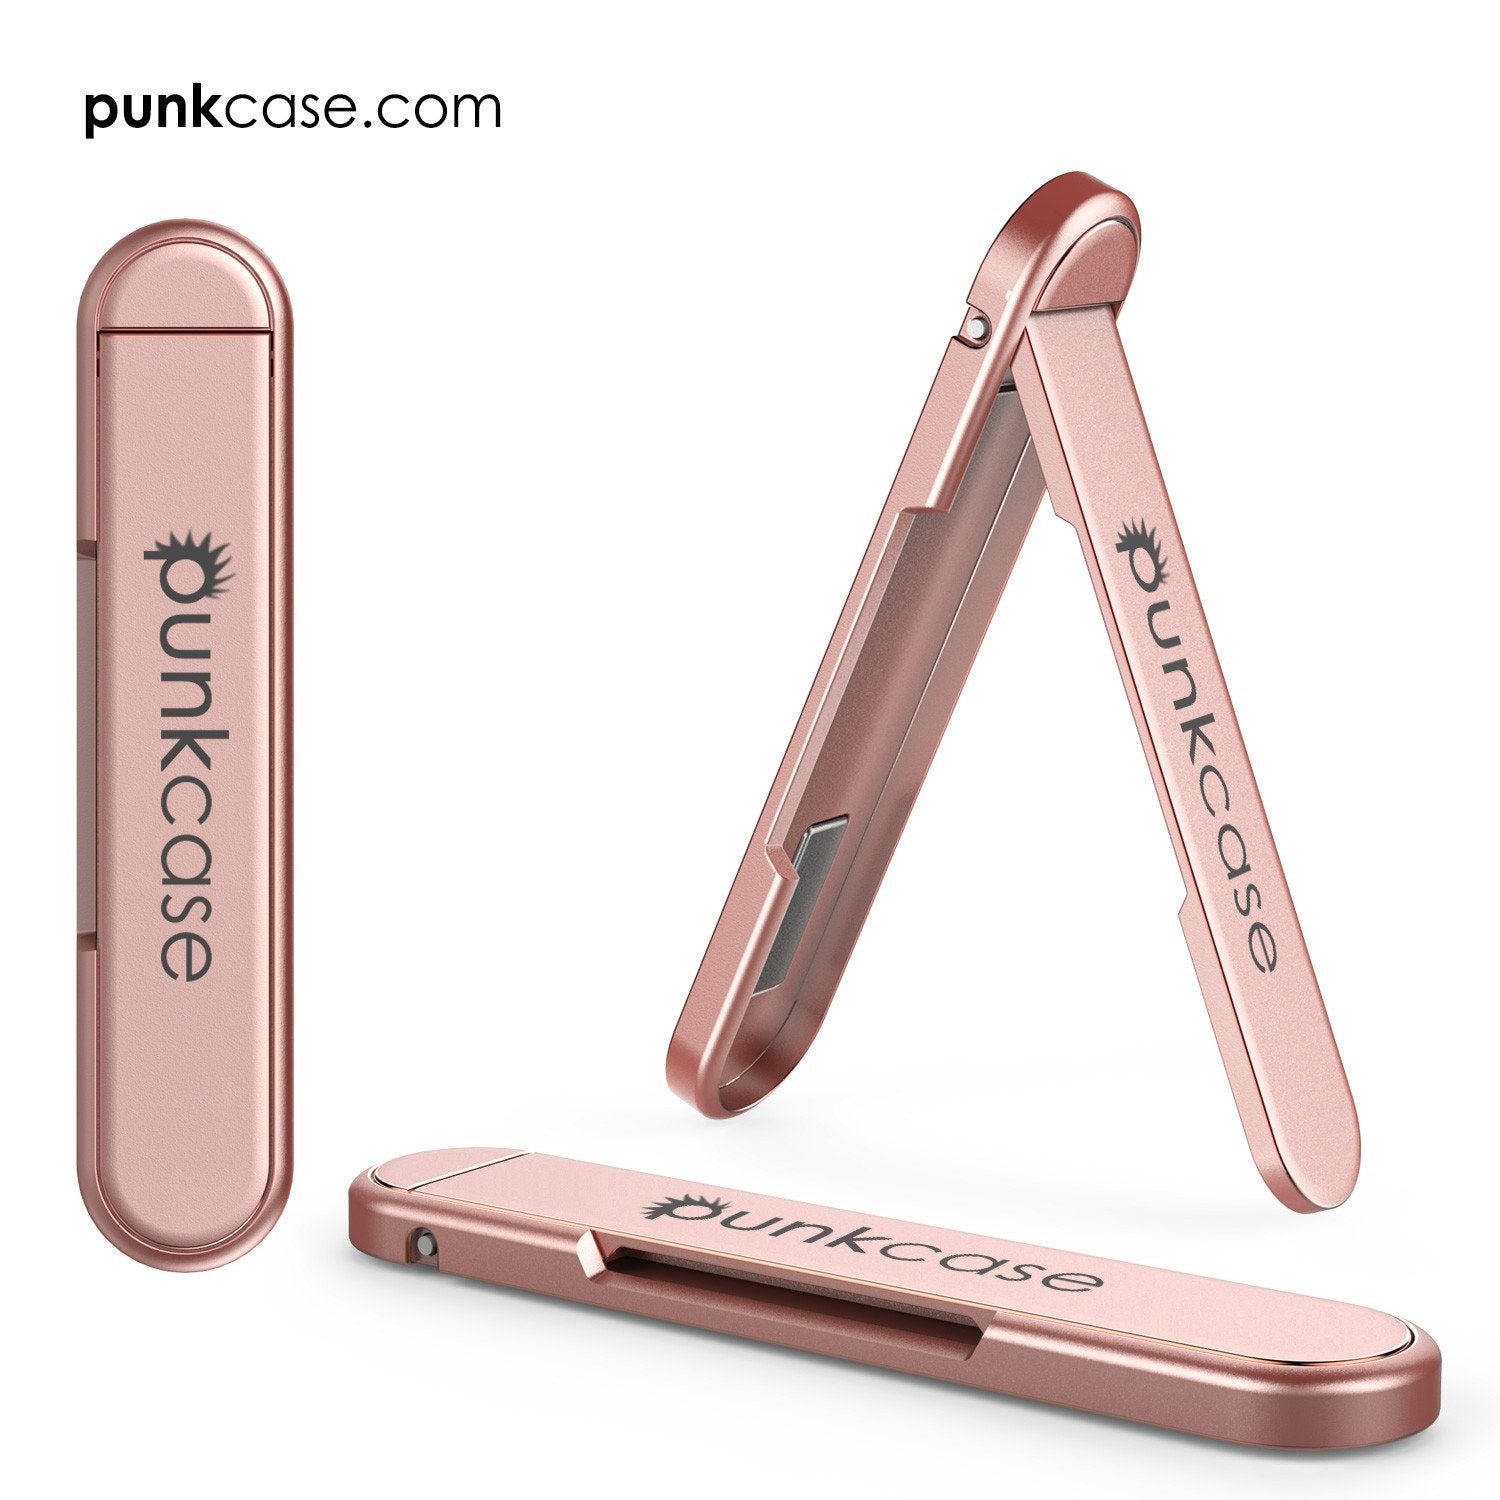 PUNKCASE FlickStick Universal Cell Phone Kickstand for all Mobile Phones & Cases with Flat Backs, One Finger Operation (Rose Gold)